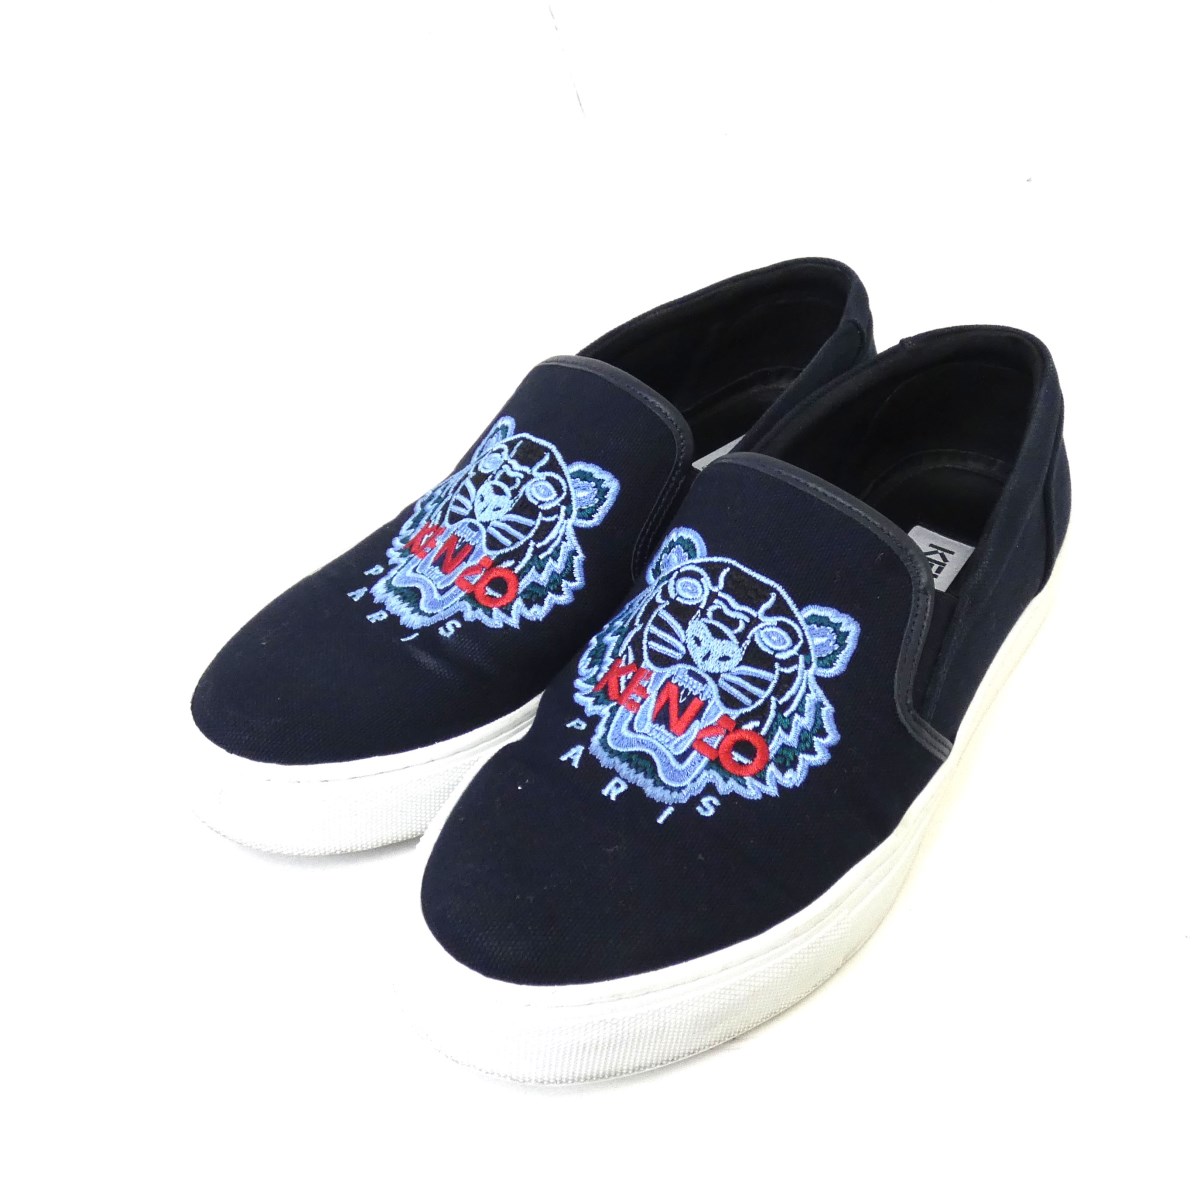 kenzo shoes online